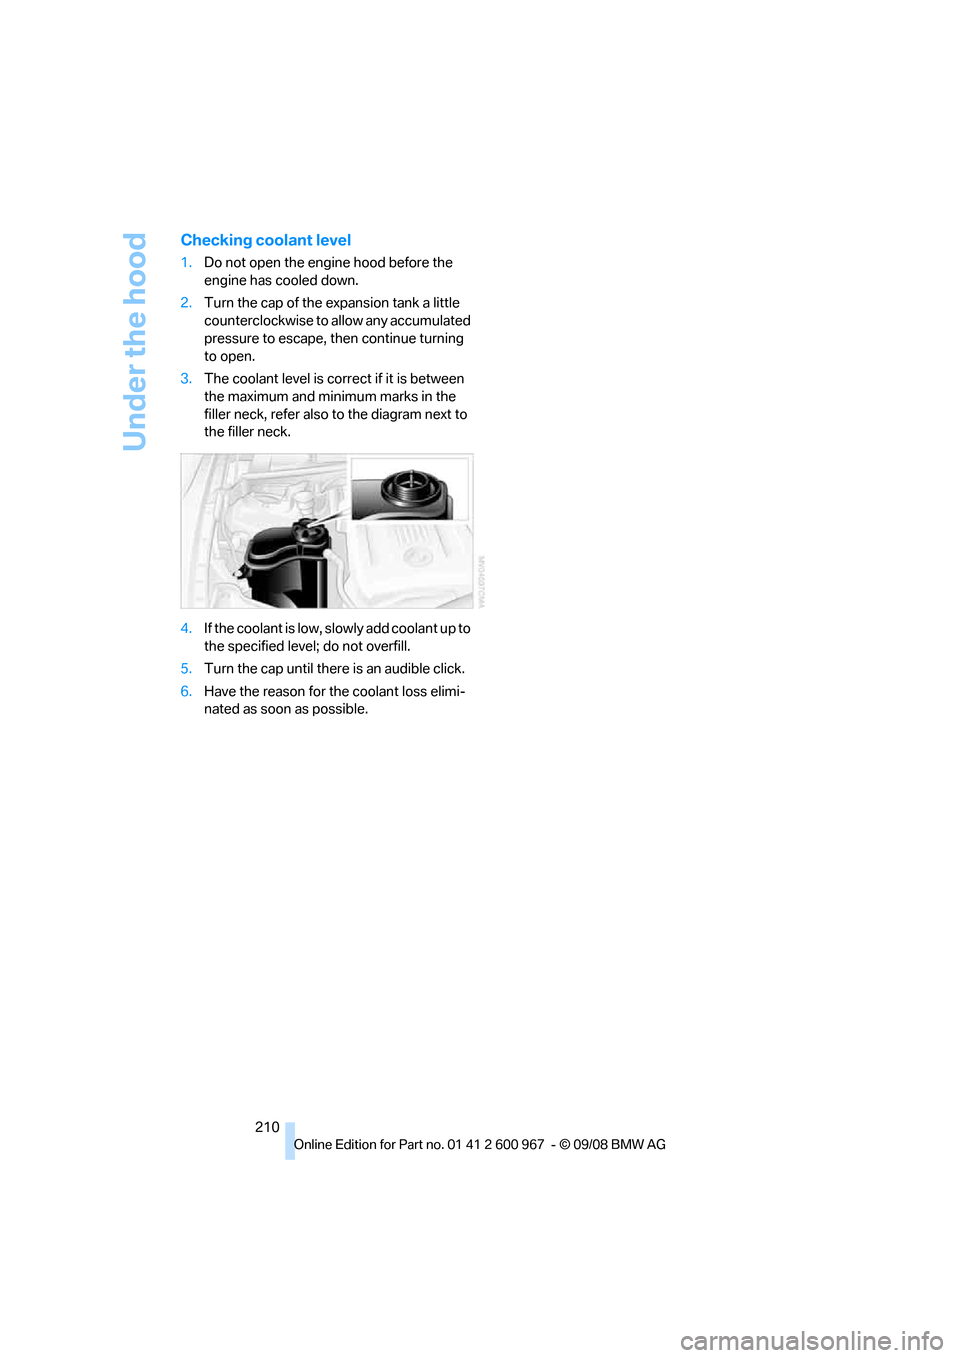 BMW 335I CONVERTIBLE 2009 E93 Owners Manual Under the hood
210
Checking coolant level
1.Do not open the engine hood before the 
engine has cooled down.
2.Turn the cap of the expansion tank a little 
counterclockwise to allow any accumulated 
pr